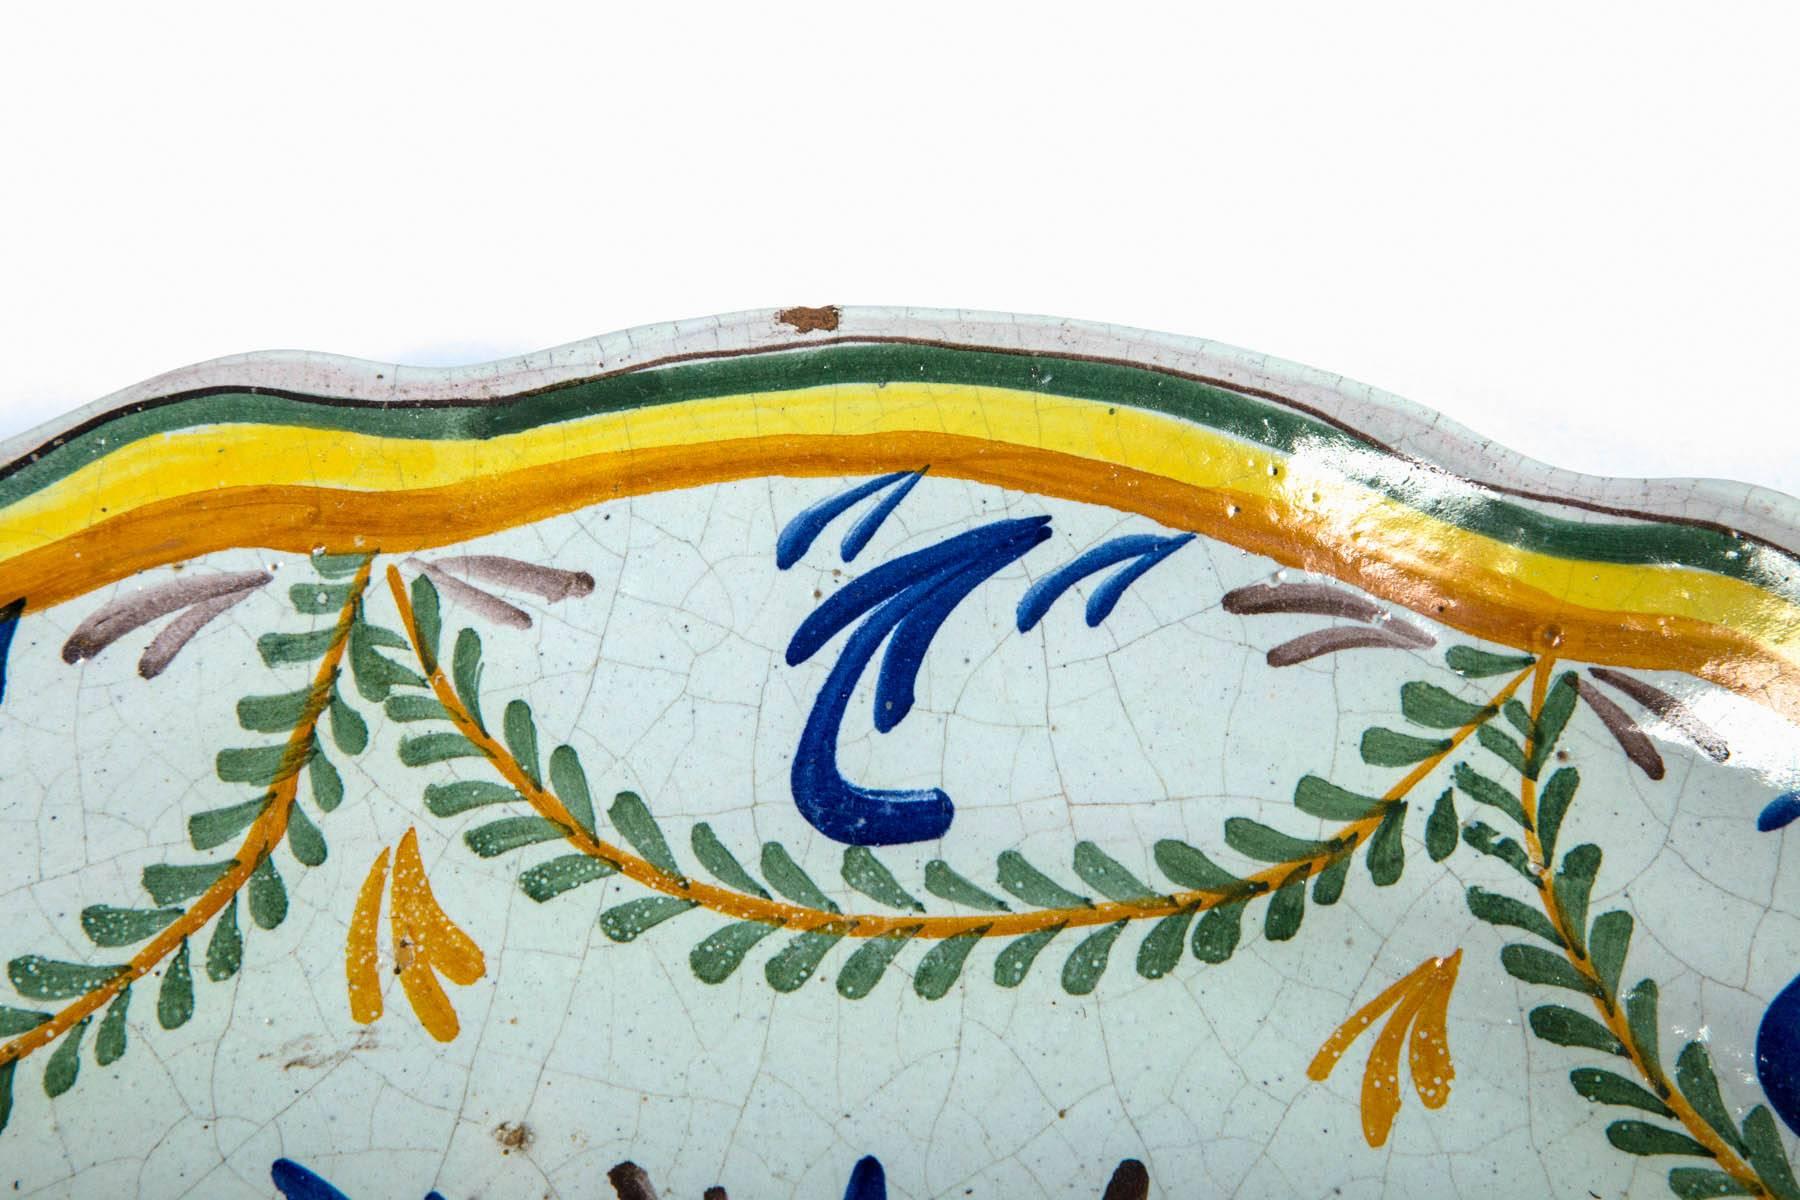 French faience platter, late 19th century. Wonderful hand-painted design in traditional French blue, yellow and green glazes. Oval shape with scallop edge.